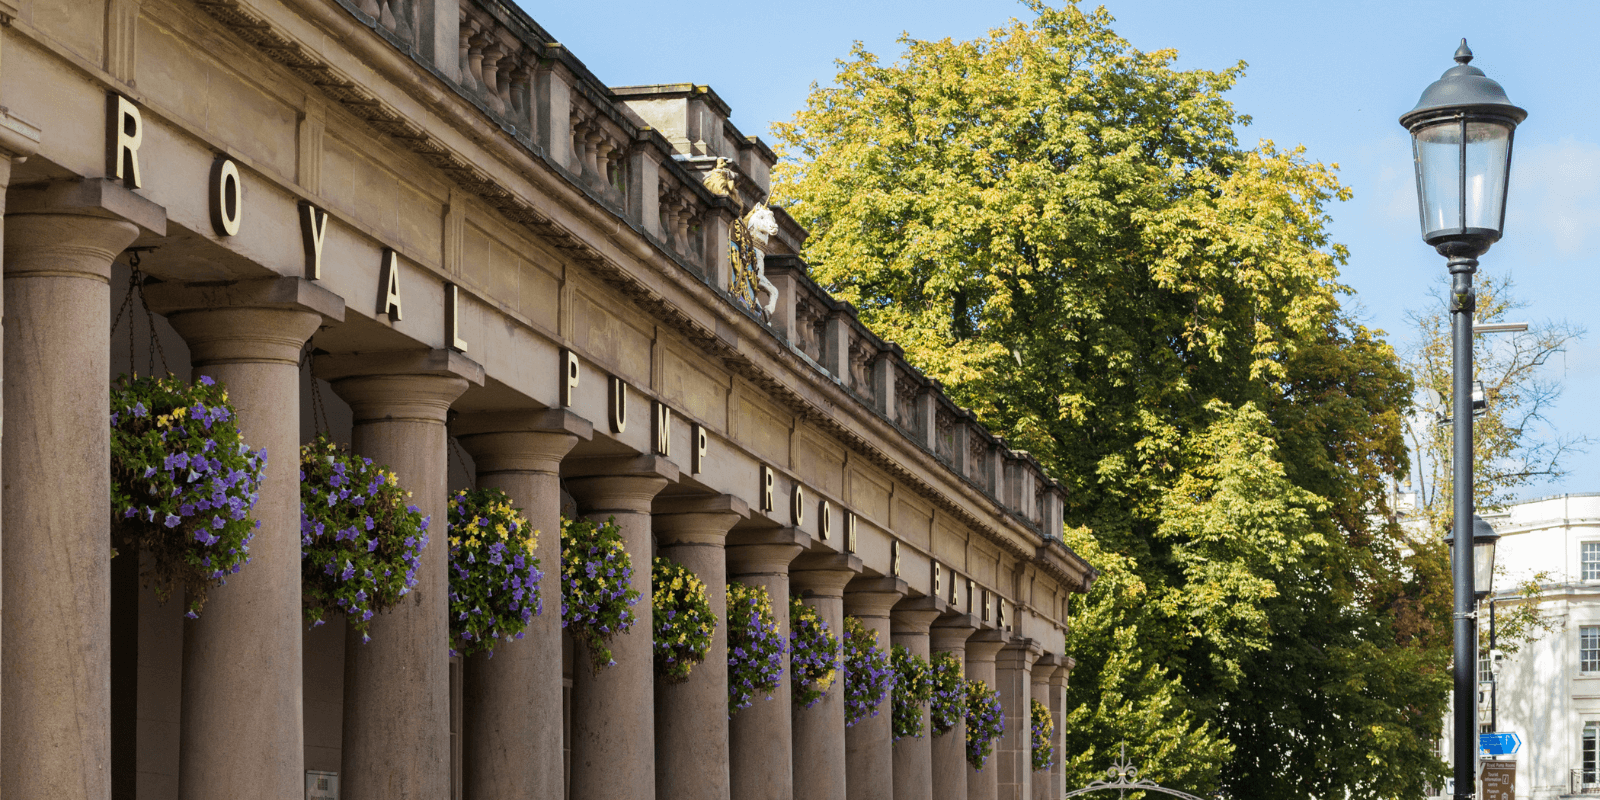 An image of Leamington Spa's Pump Rooms in the foreground, with purple and yellow flowers hanging down on the building, there is also a lamppost in the front and a tree in the background.